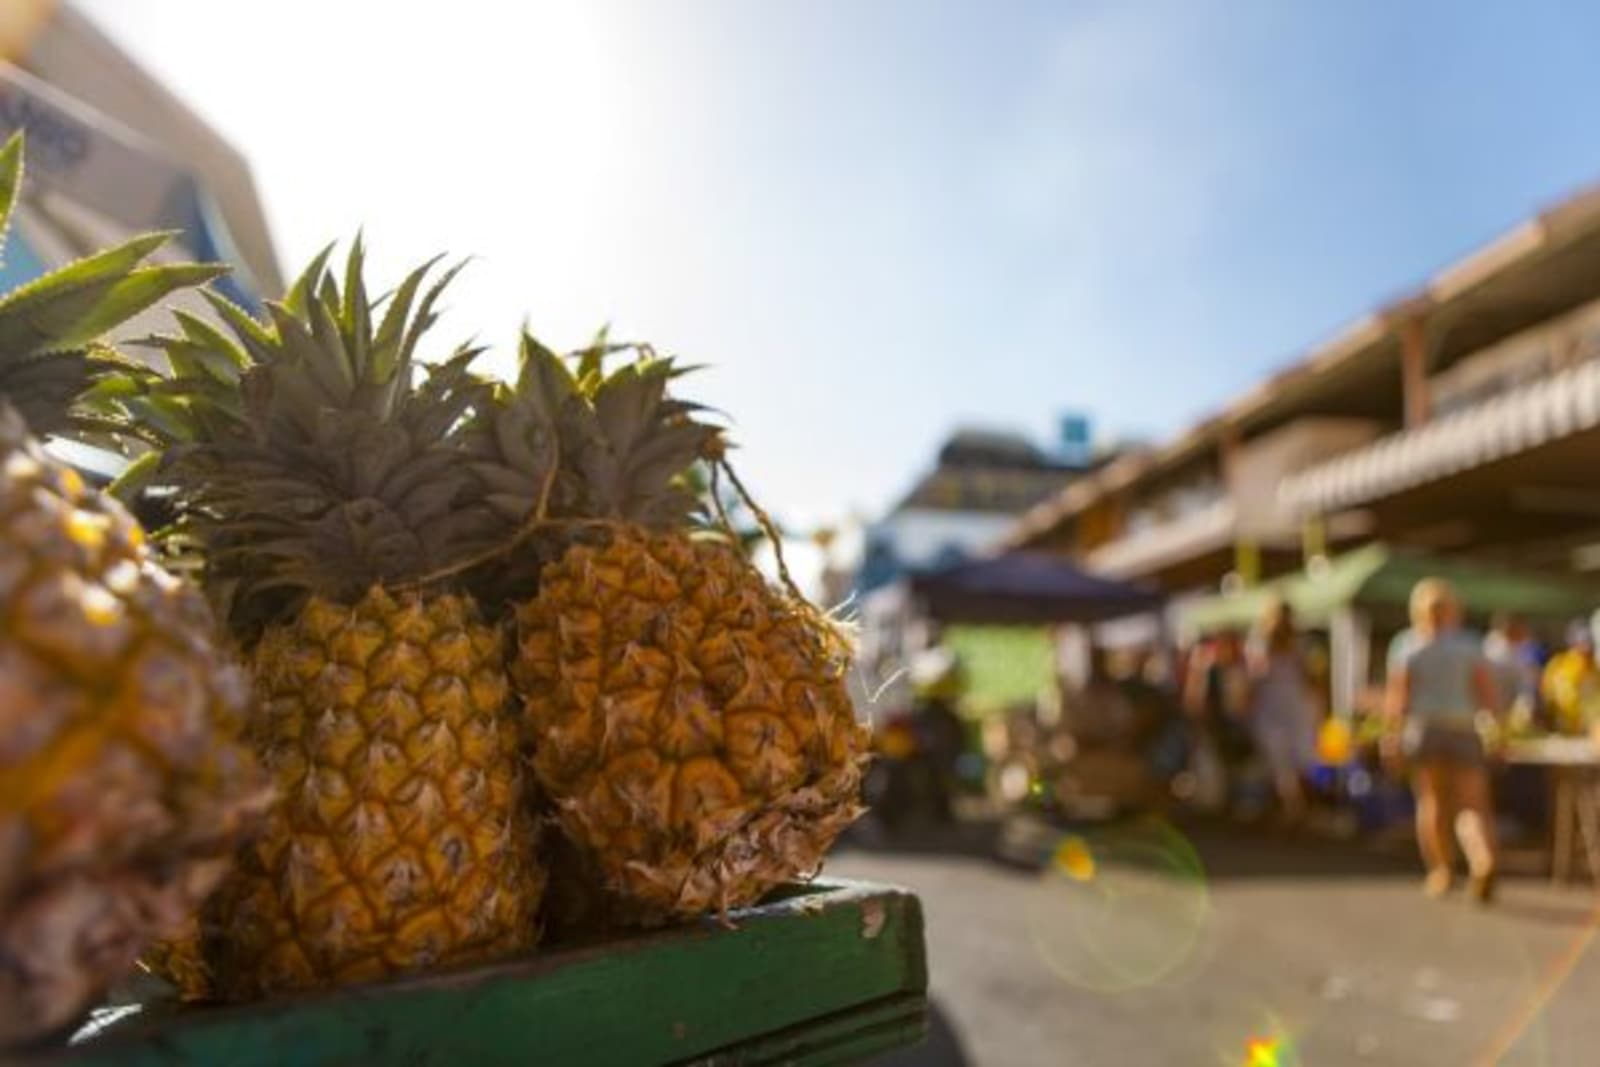 Pineapples in a market with people walking in background blurred